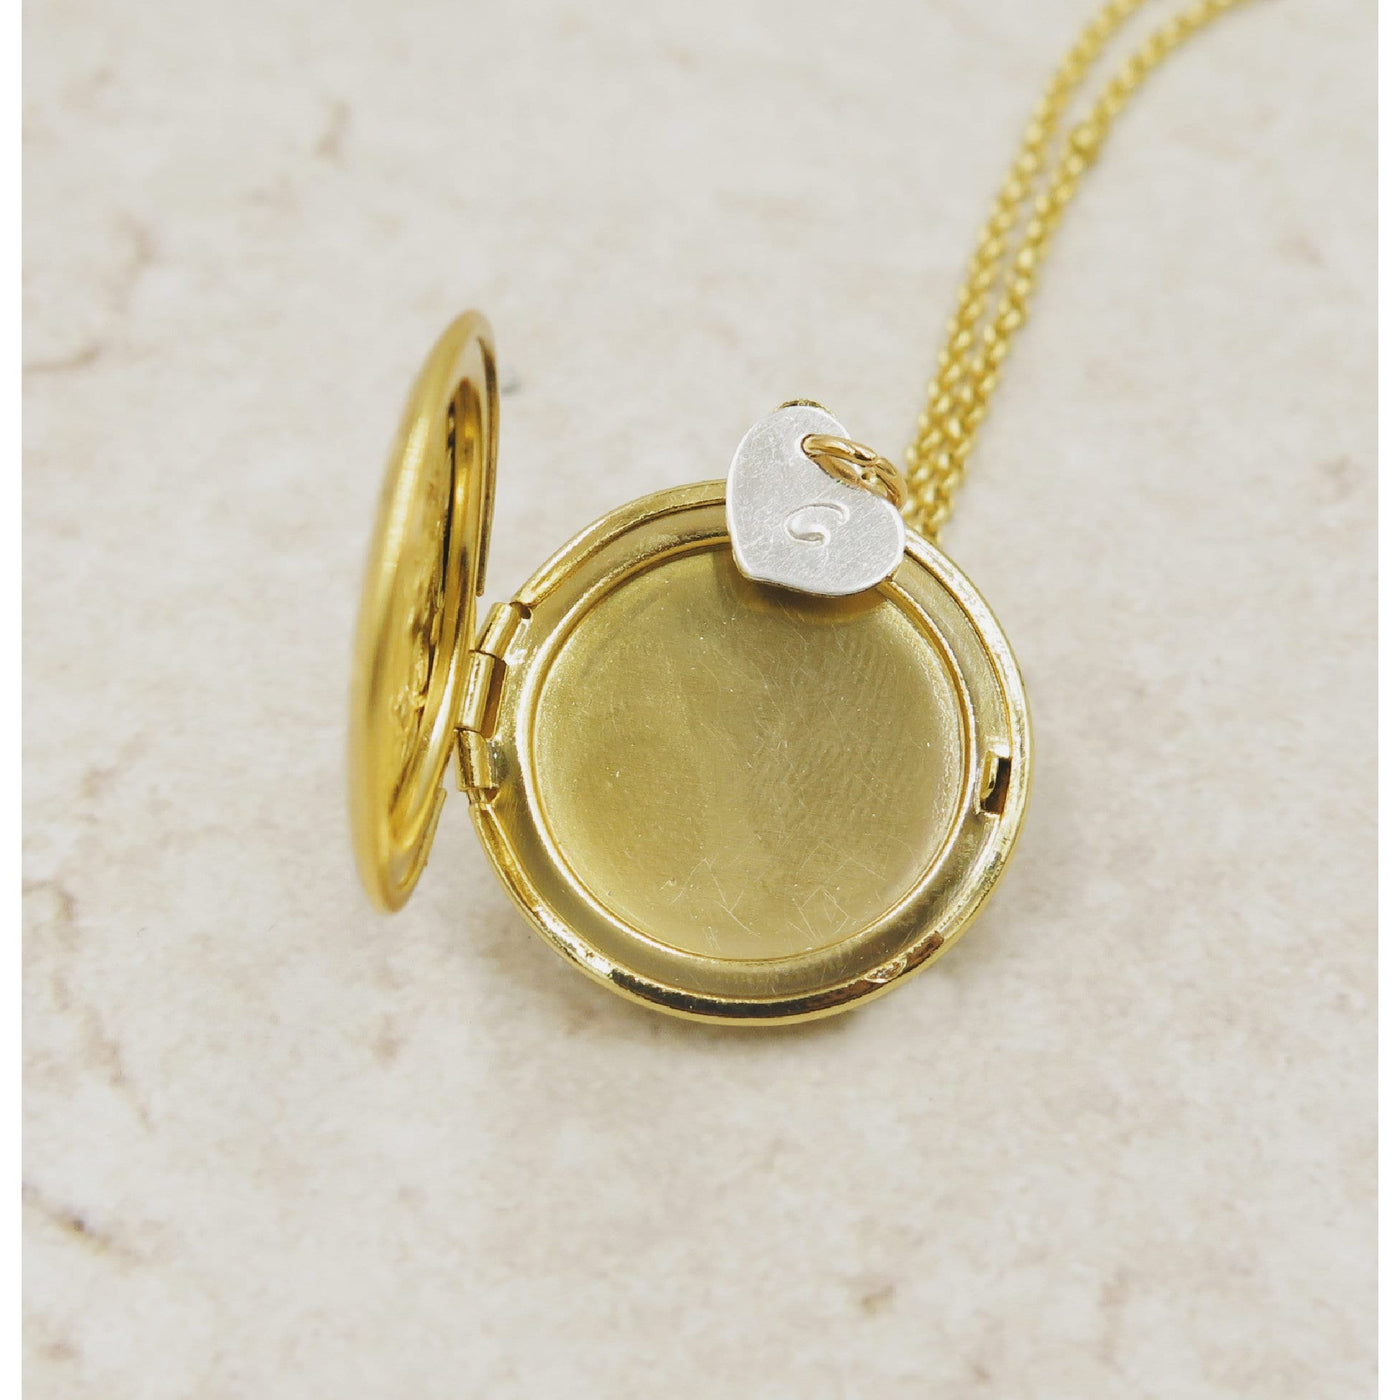 Gold Floral Locket with Personalized Charm and Photos